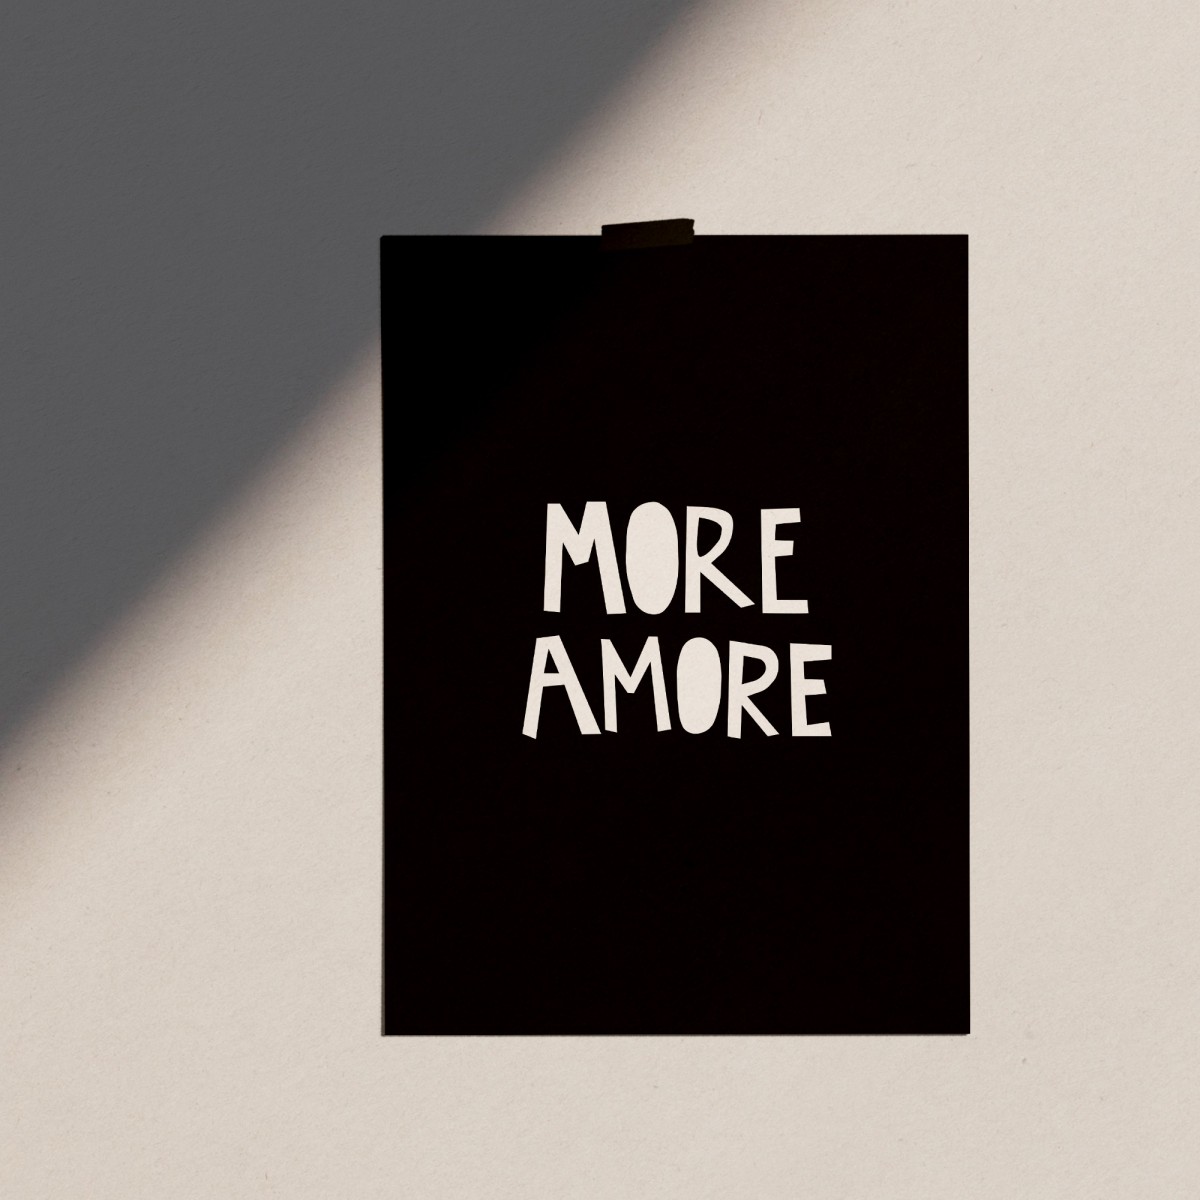 Love is the new black — Poster "More Amore", Din A4 Format